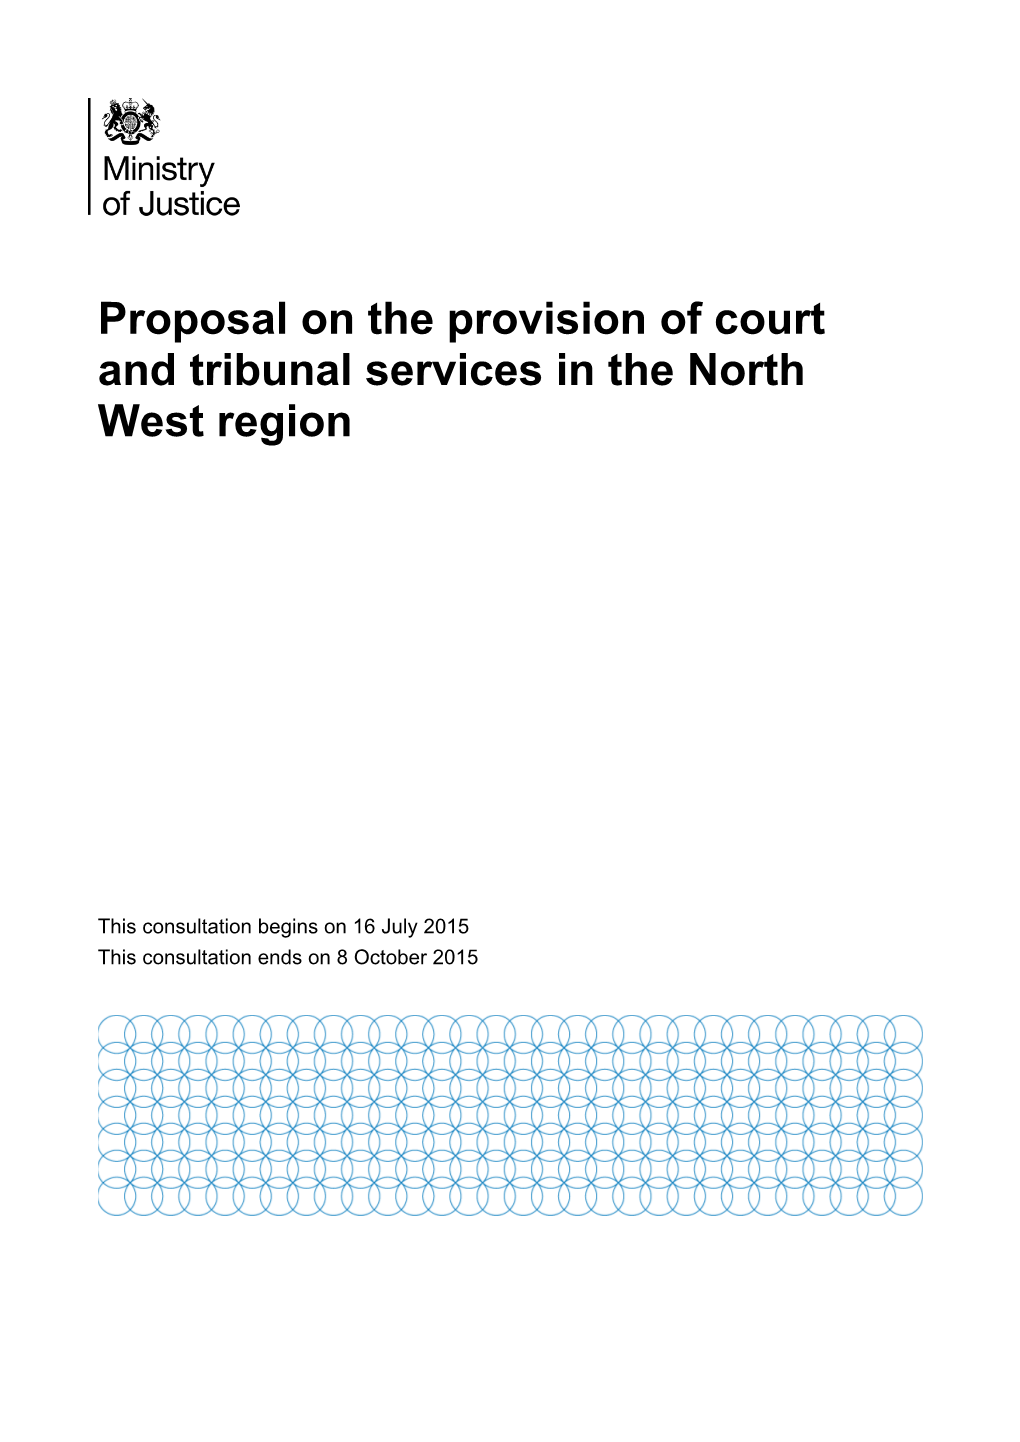 Ministry of Justice Consultation Paper